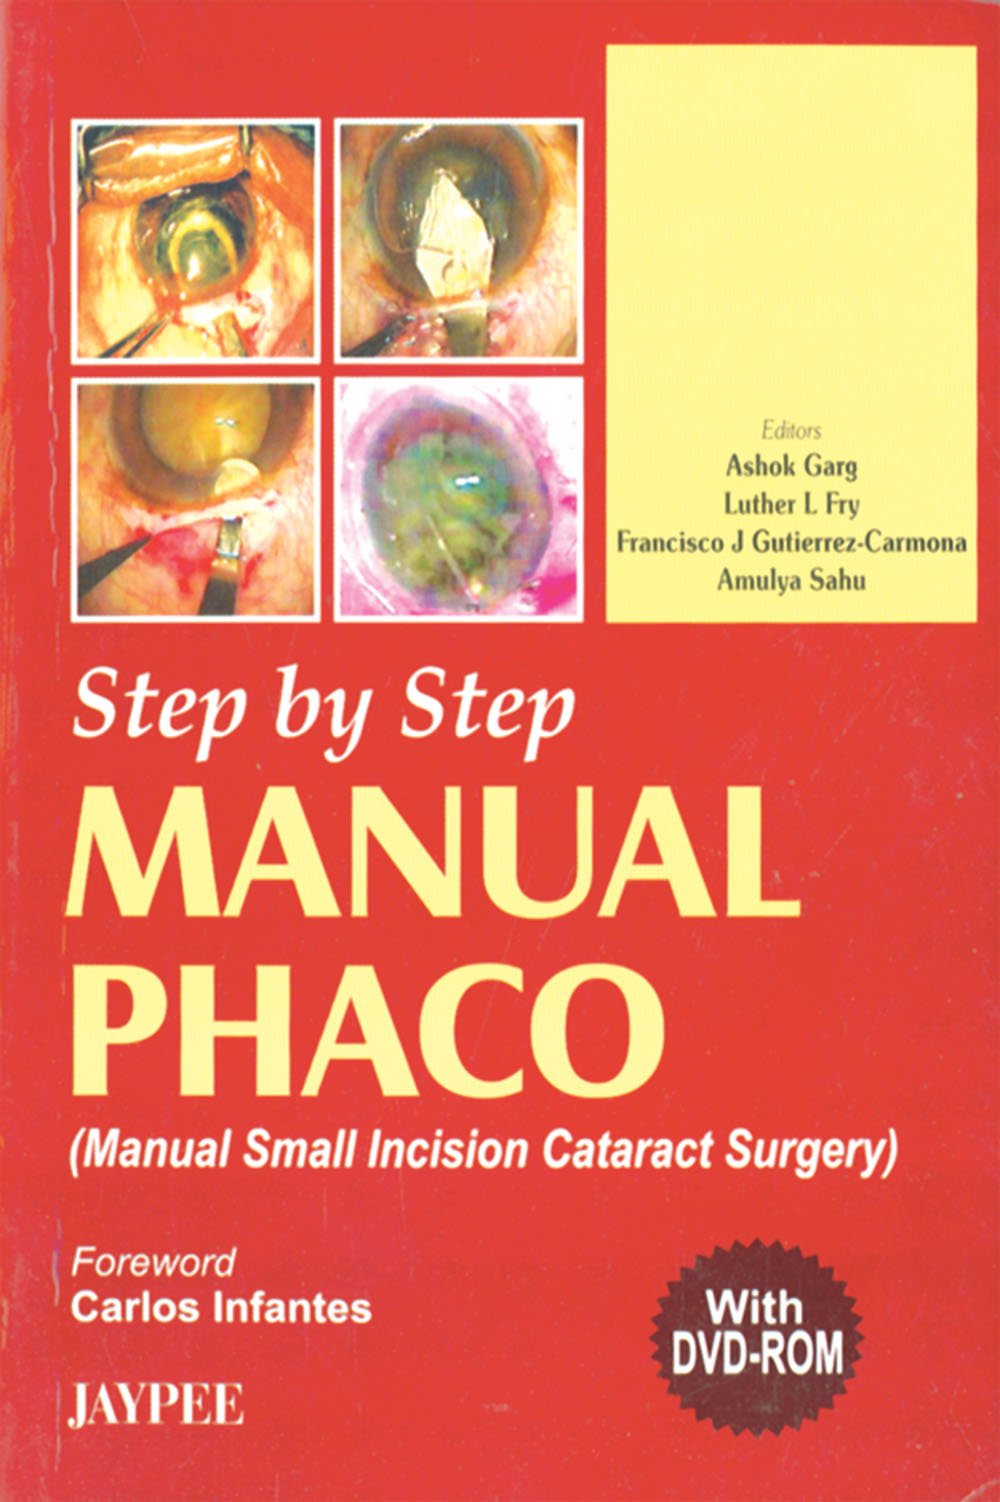 Step By Step Manual Phaco With Dvd-Rom